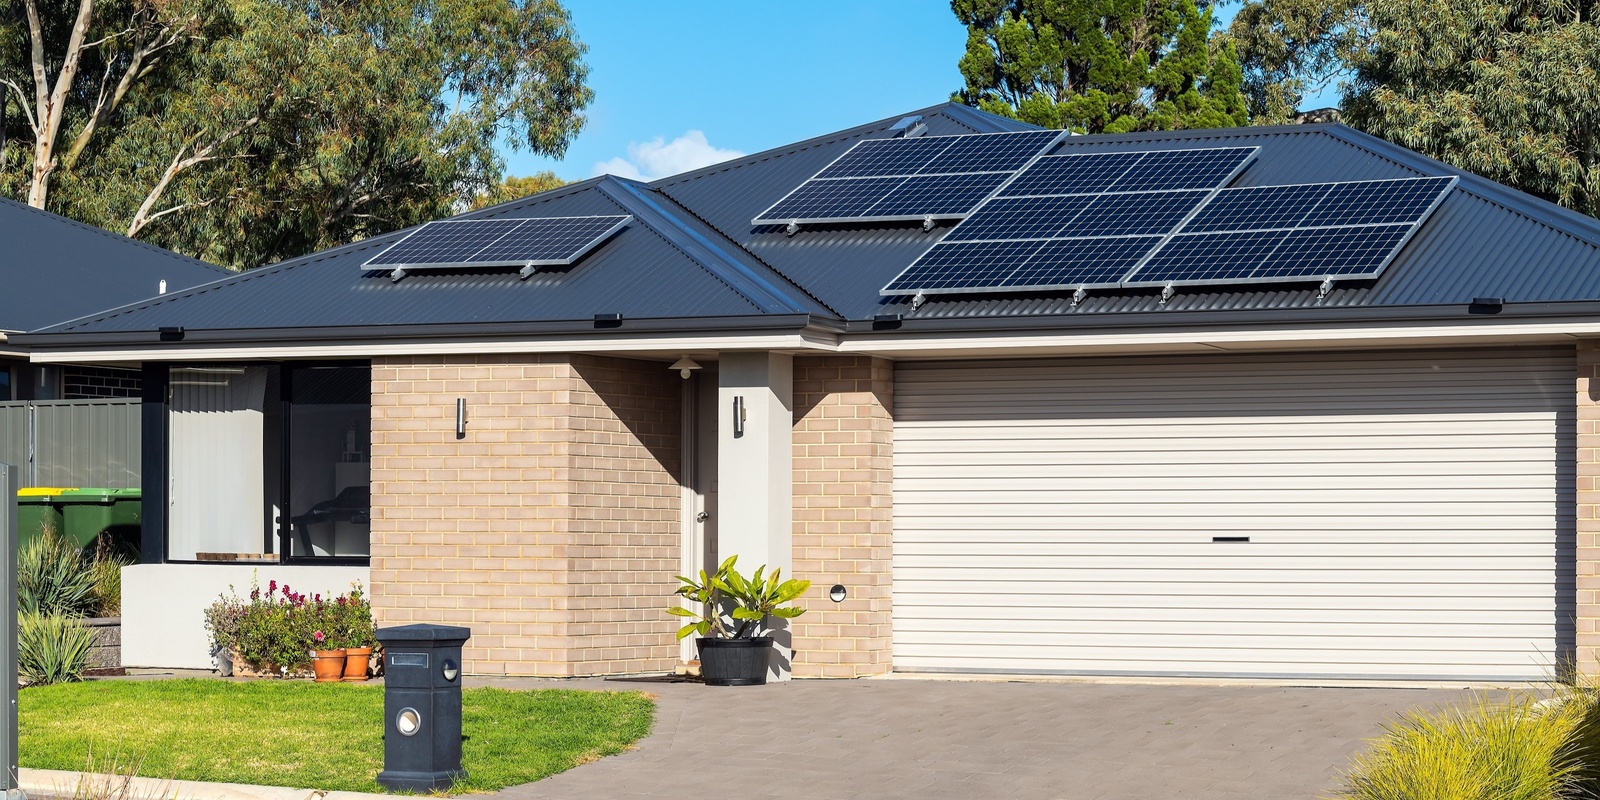 Solar Panels and Batteries - Your Questions Answered